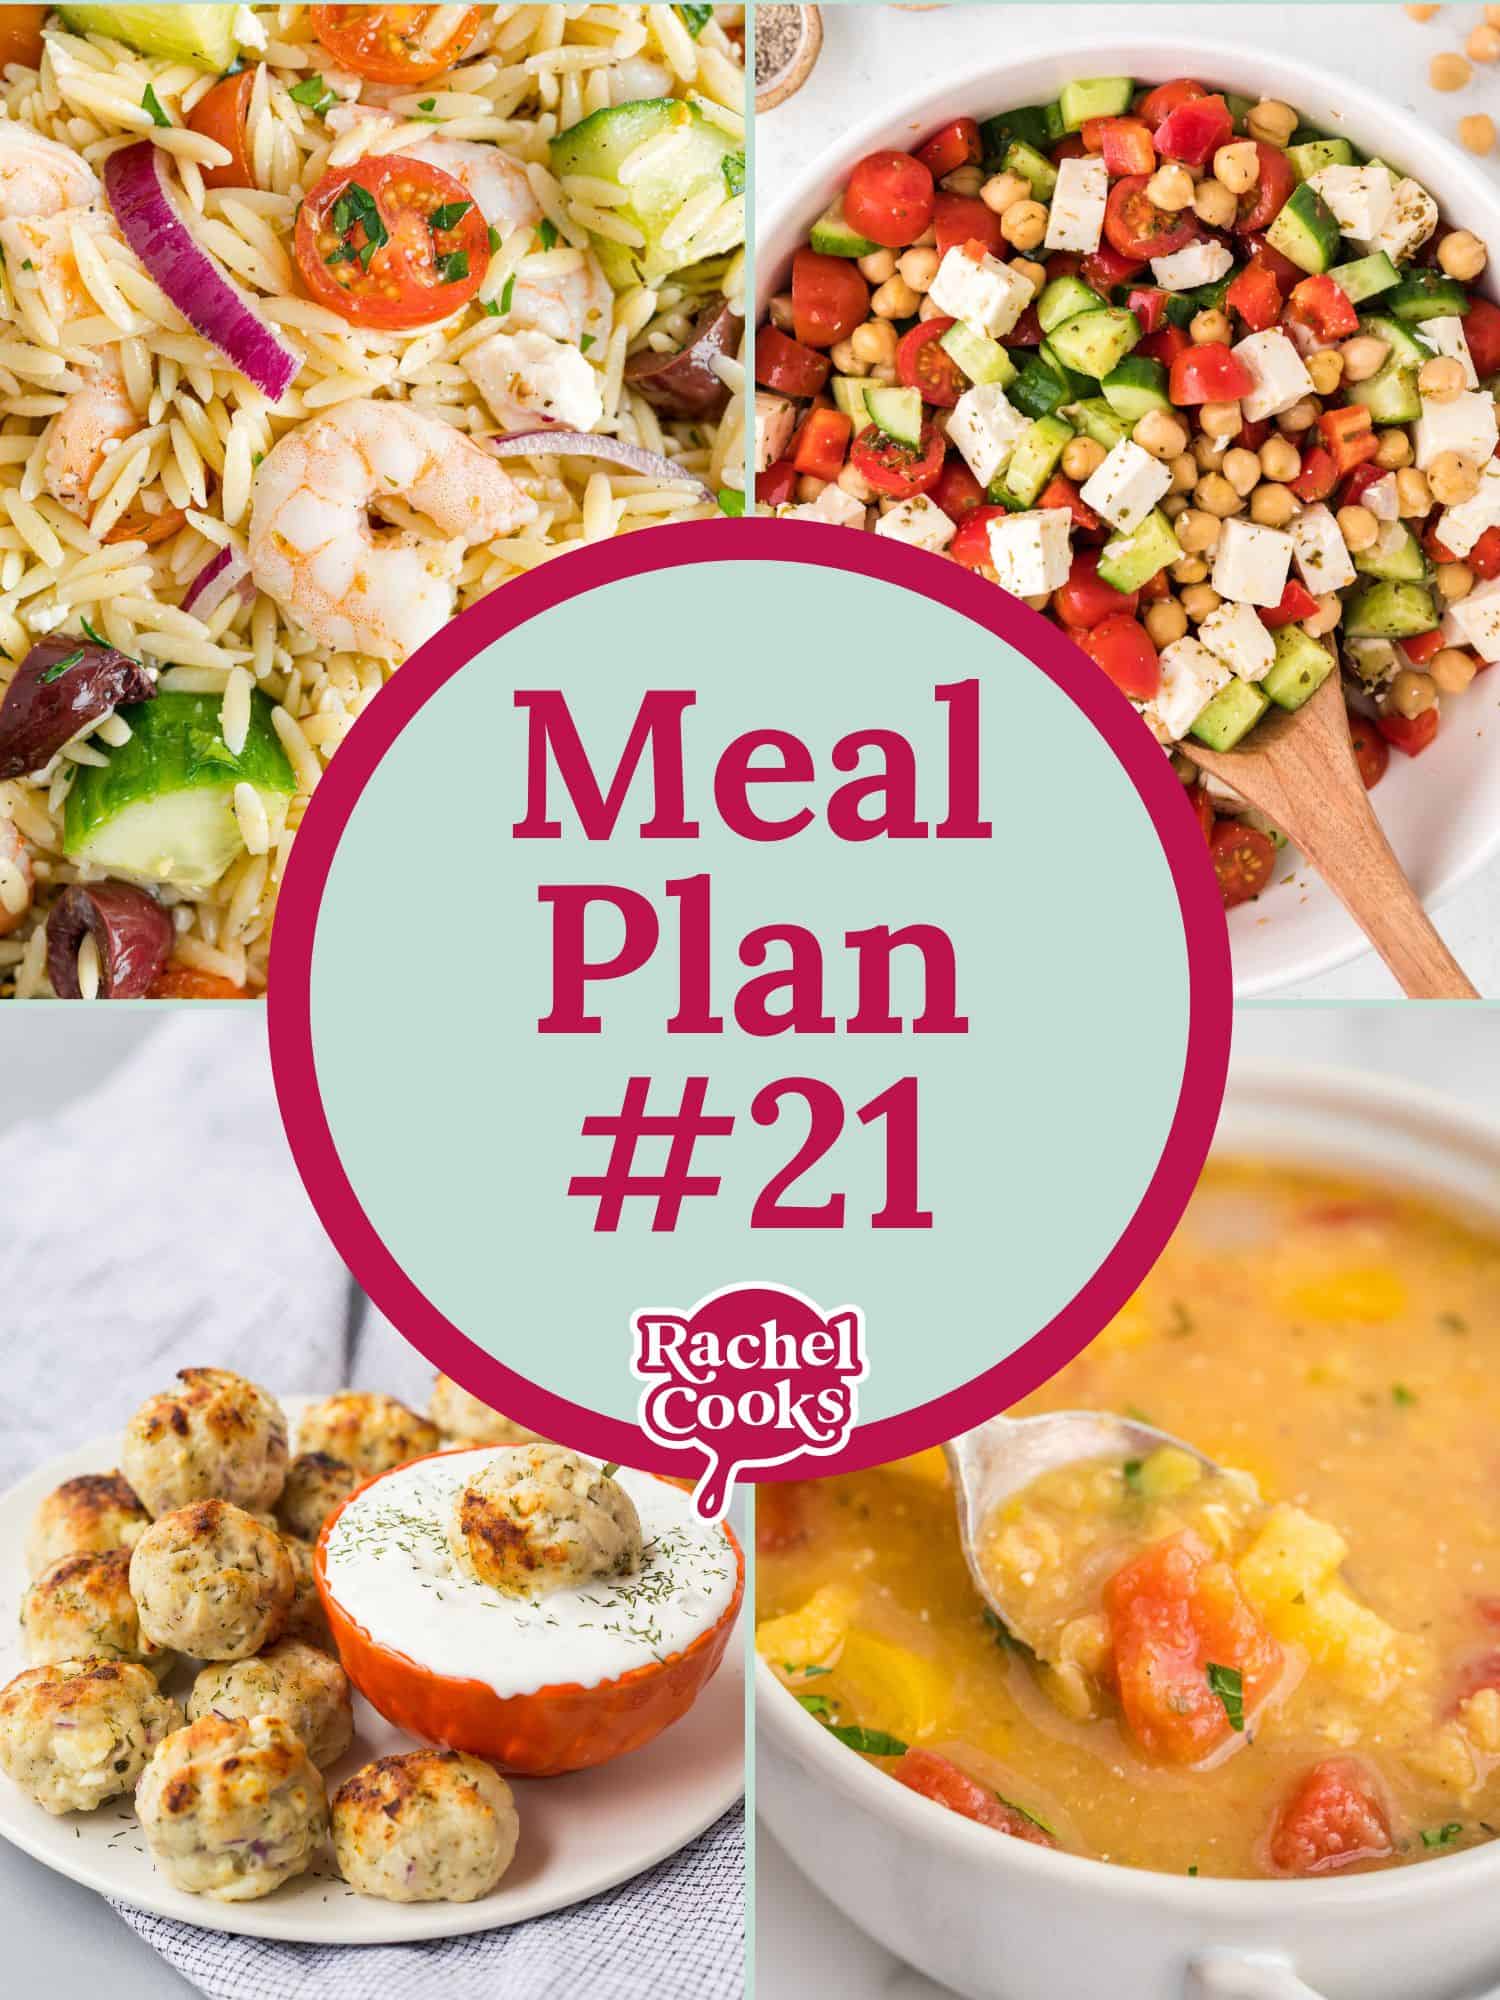 Meal plan 21 post graphic with photo and text.